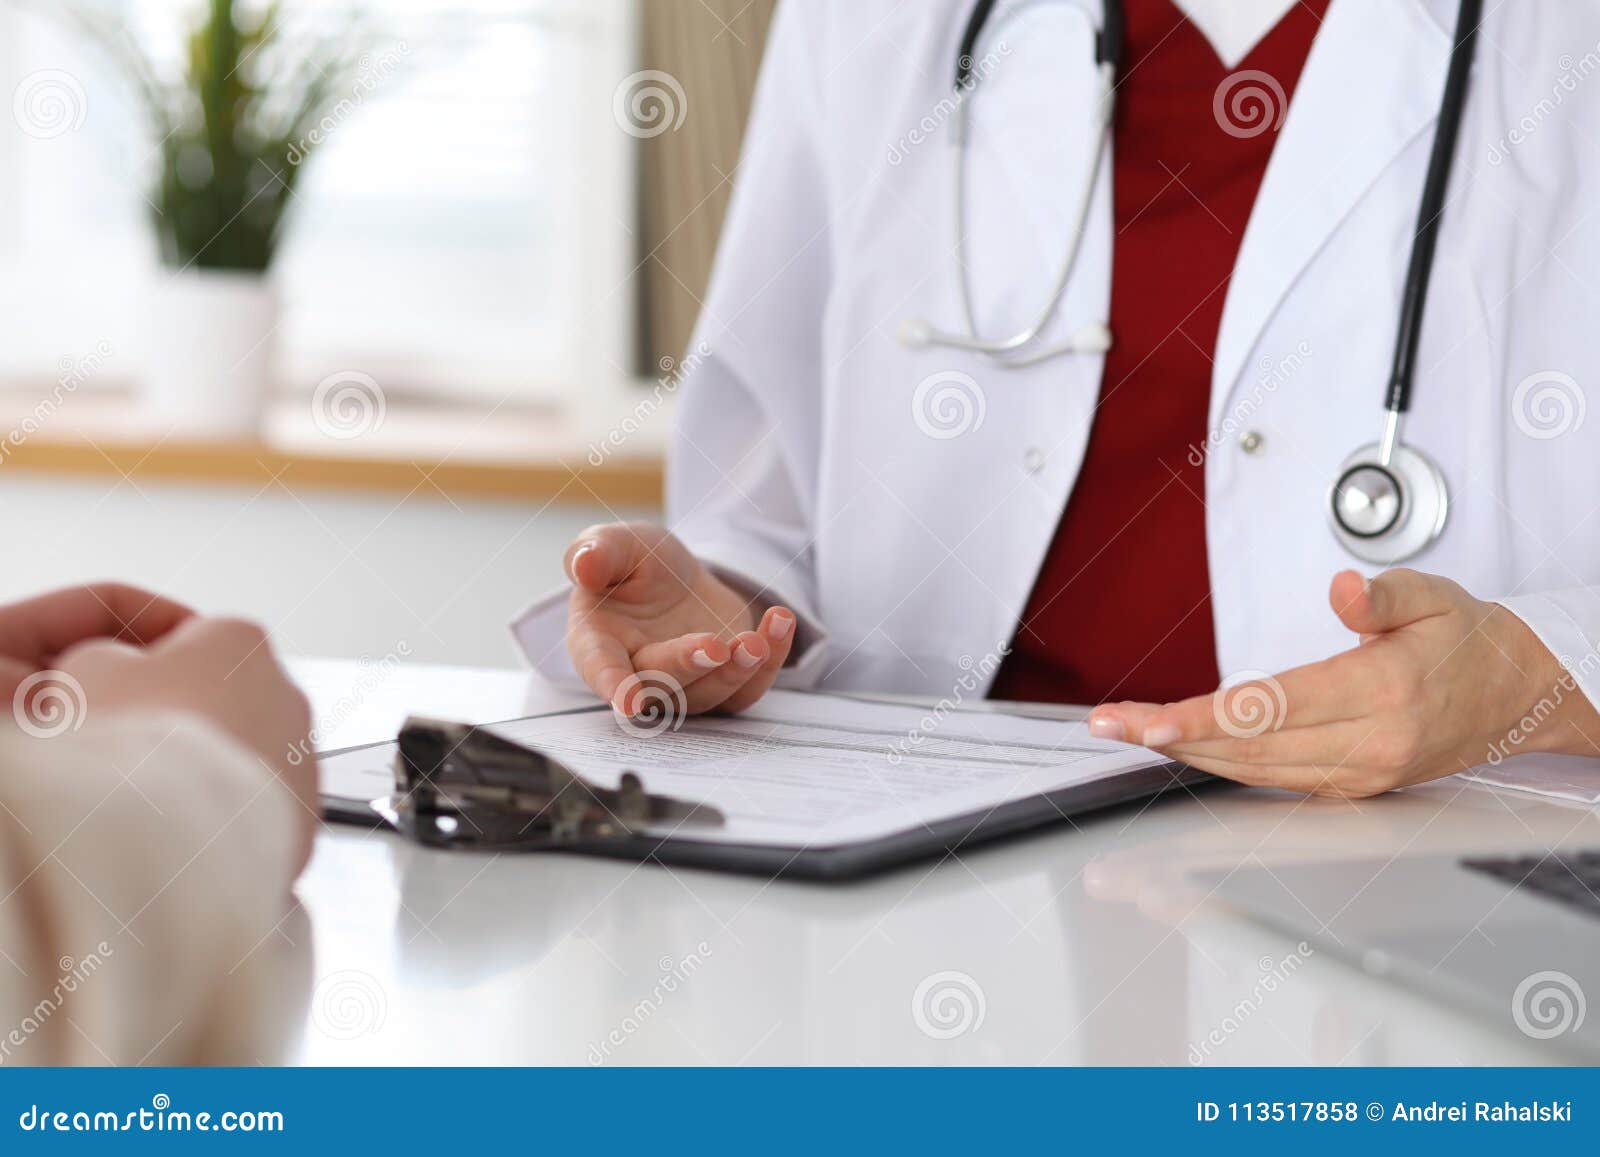 close up of a doctor and patient hands while discussing medical records after health examination